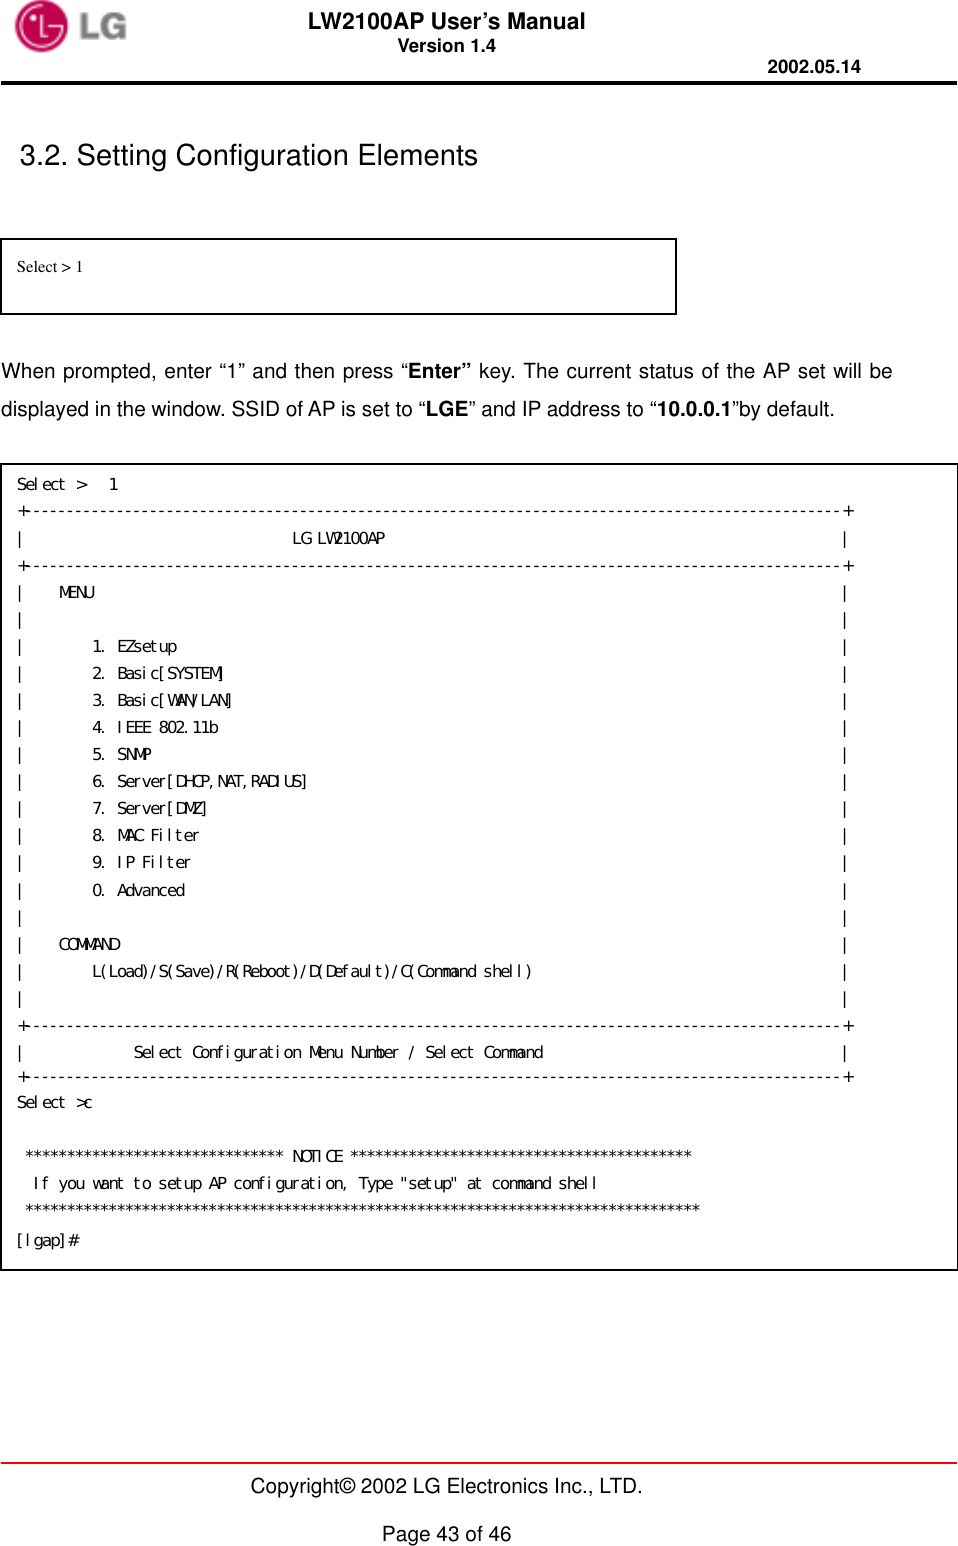 LW2100AP User’s Manual Version 1.4 2002.05.14   Copyright© 2002 LG Electronics Inc., LTD.  Page 43 of 46  3.2. Setting Configuration Elements   When prompted, enter “1” and then press “Enter” key. The current status of the AP set will be displayed in the window. SSID of AP is set to “LGE” and IP address to “10.0.0.1”by default.     Select &gt; 1  Select &gt;   1 +--------------------------------------------------------------------------------------------------+ |                                LG LW2100AP                                                       | +--------------------------------------------------------------------------------------------------+ |    MENU                                                                                          | |                                                                                                  | |        1. EZsetup                                                                                | |        2. Basic[SYSTEM]                                                                          | |        3. Basic[WAN/LAN]                                                                         | |        4. IEEE 802.11b                                                                           | |        5. SNMP                                                                                   | |        6. Server[DHCP,NAT,RADIUS]                                                                | |        7. Server[DMZ]                                                                            | |        8. MAC Filter                                                                             | |        9. IP Filter                                                                              | |        0. Advanced                                                                               | |                                                                                                  | |    COMMAND                                                                                       | |        L(Load)/S(Save)/R(Reboot)/D(Default)/C(Command shell)                                     | |                                                                                                  | +--------------------------------------------------------------------------------------------------+ |             Select Configuration Menu Number / Select Command                                    | +--------------------------------------------------------------------------------------------------+ Select &gt;c    ******************************* NOTICE *****************************************   If you want to setup AP configuration, Type &quot;setup&quot; at command shell  ********************************************************************************* [lgap]# 